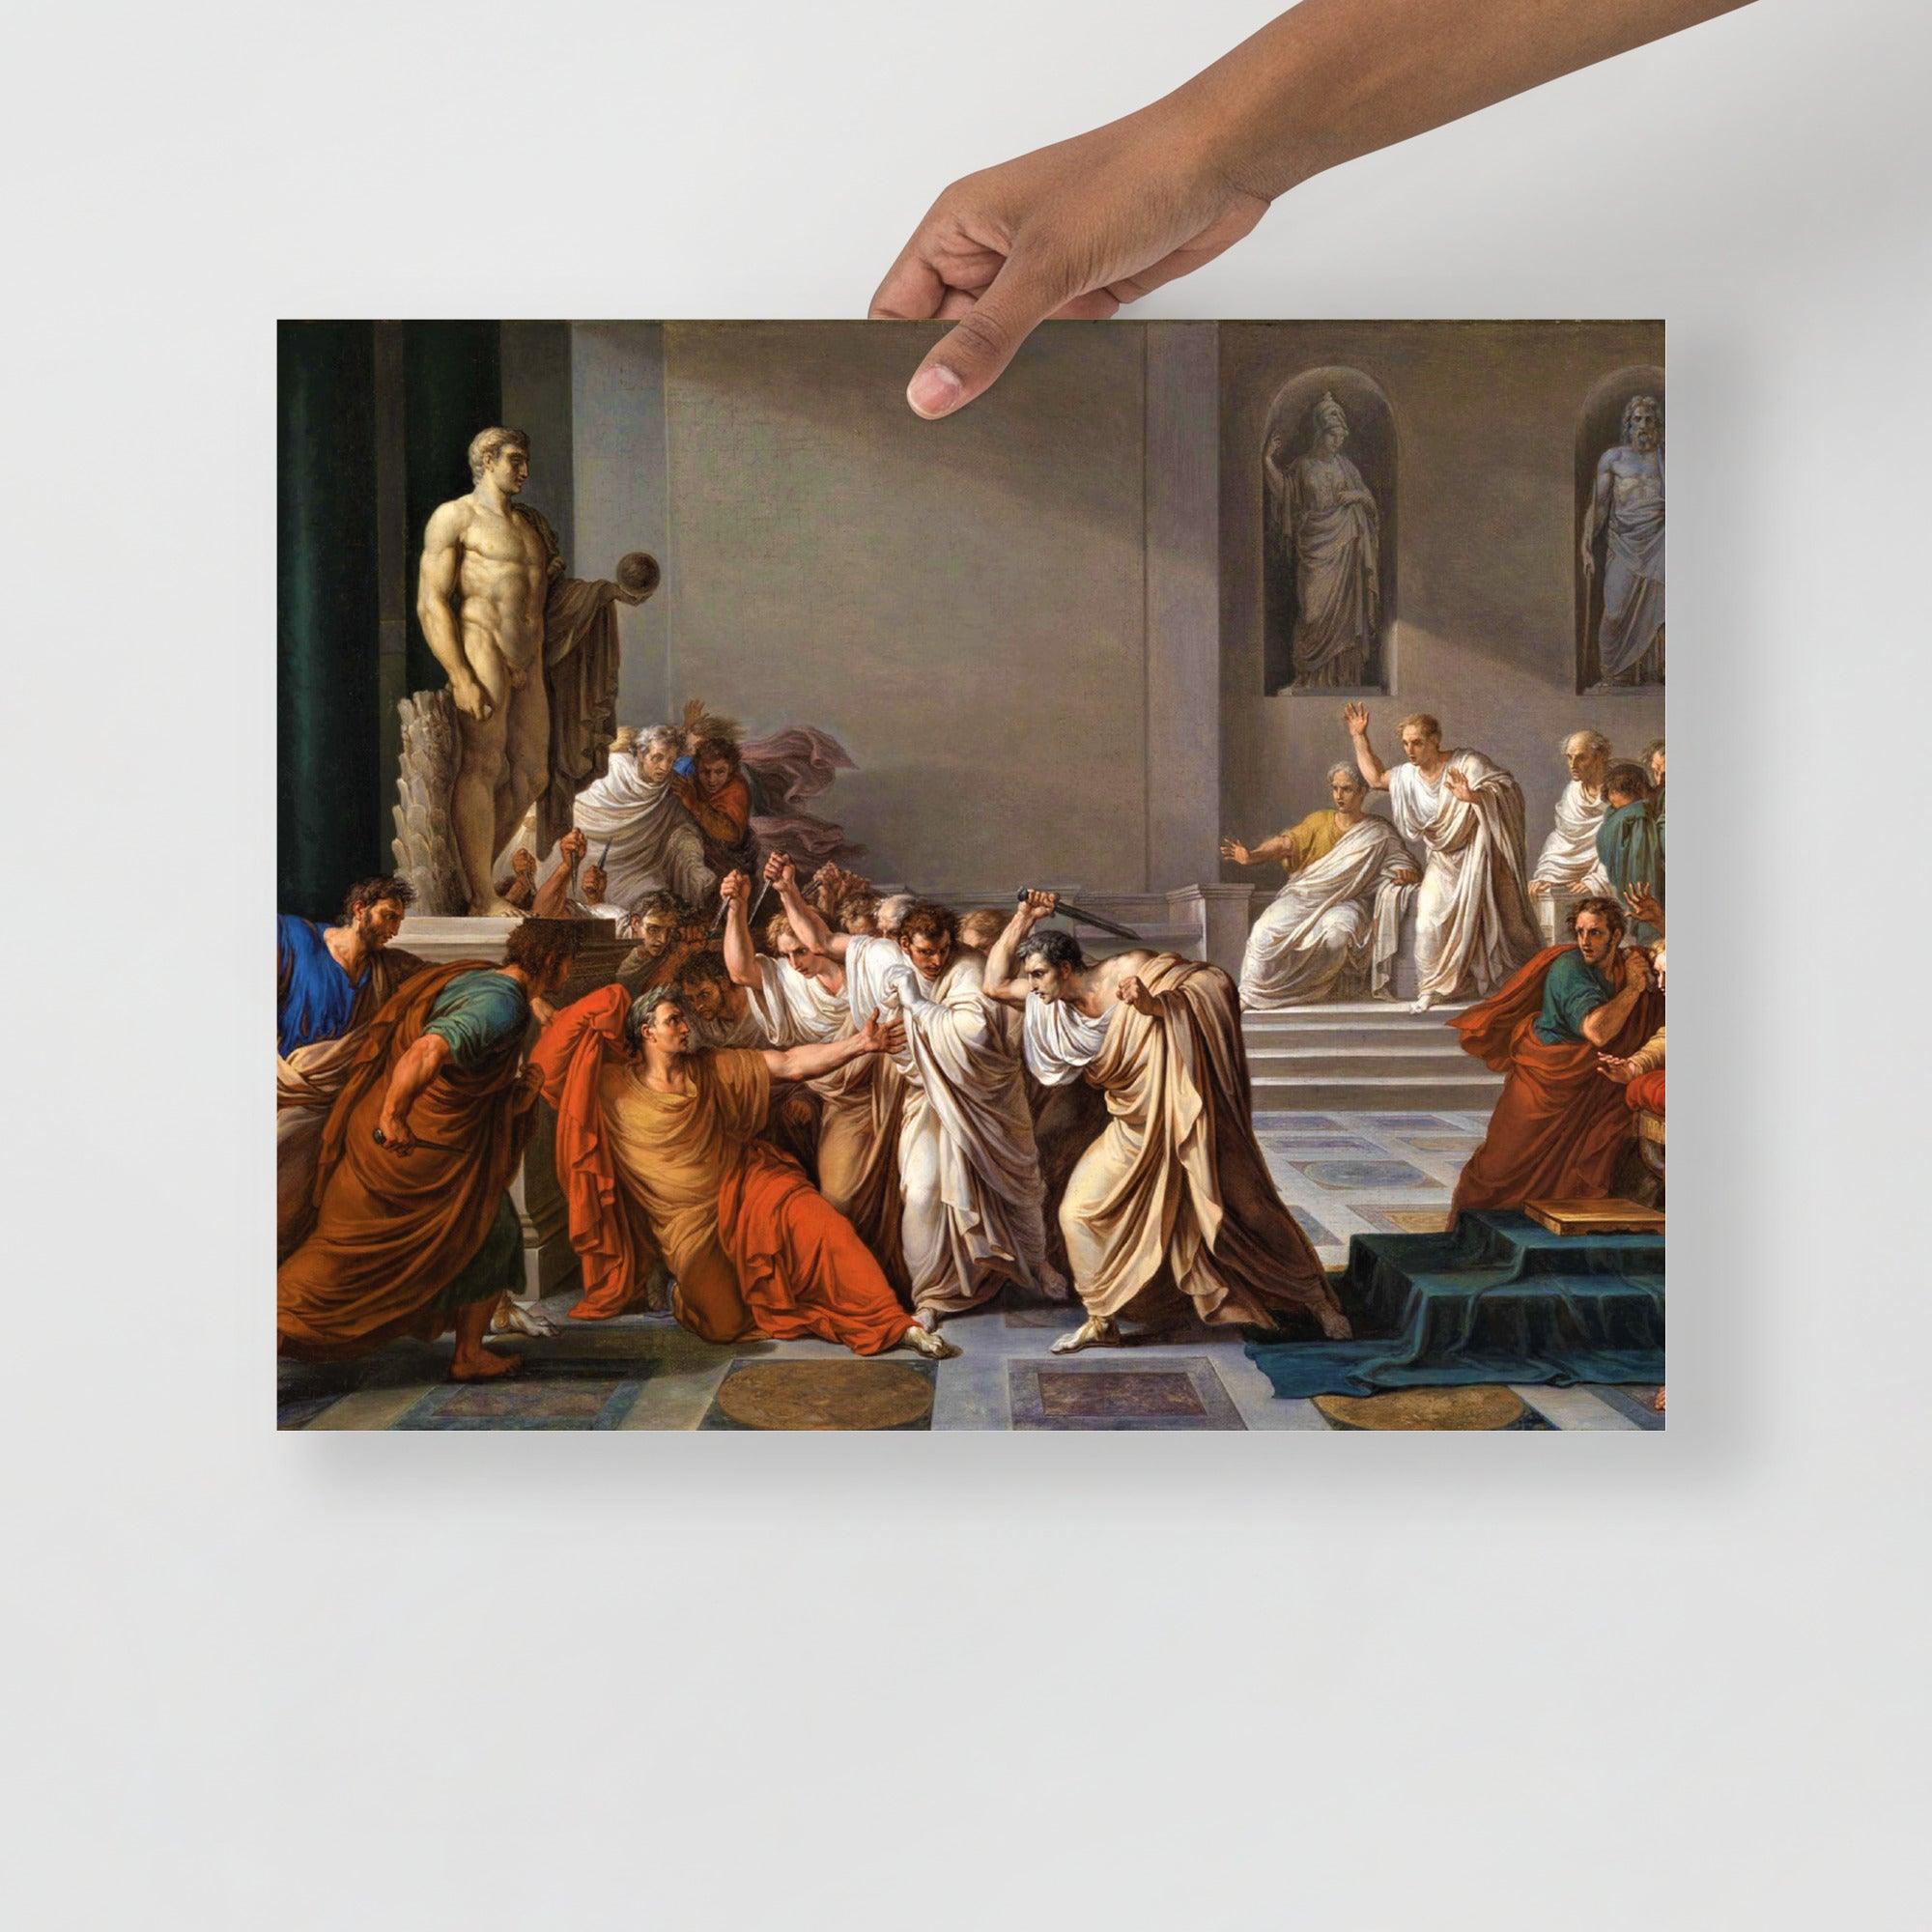 The Death of Julius Caesar by Vincenzo Camuccini poster on a plain backdrop in size 16x20”.